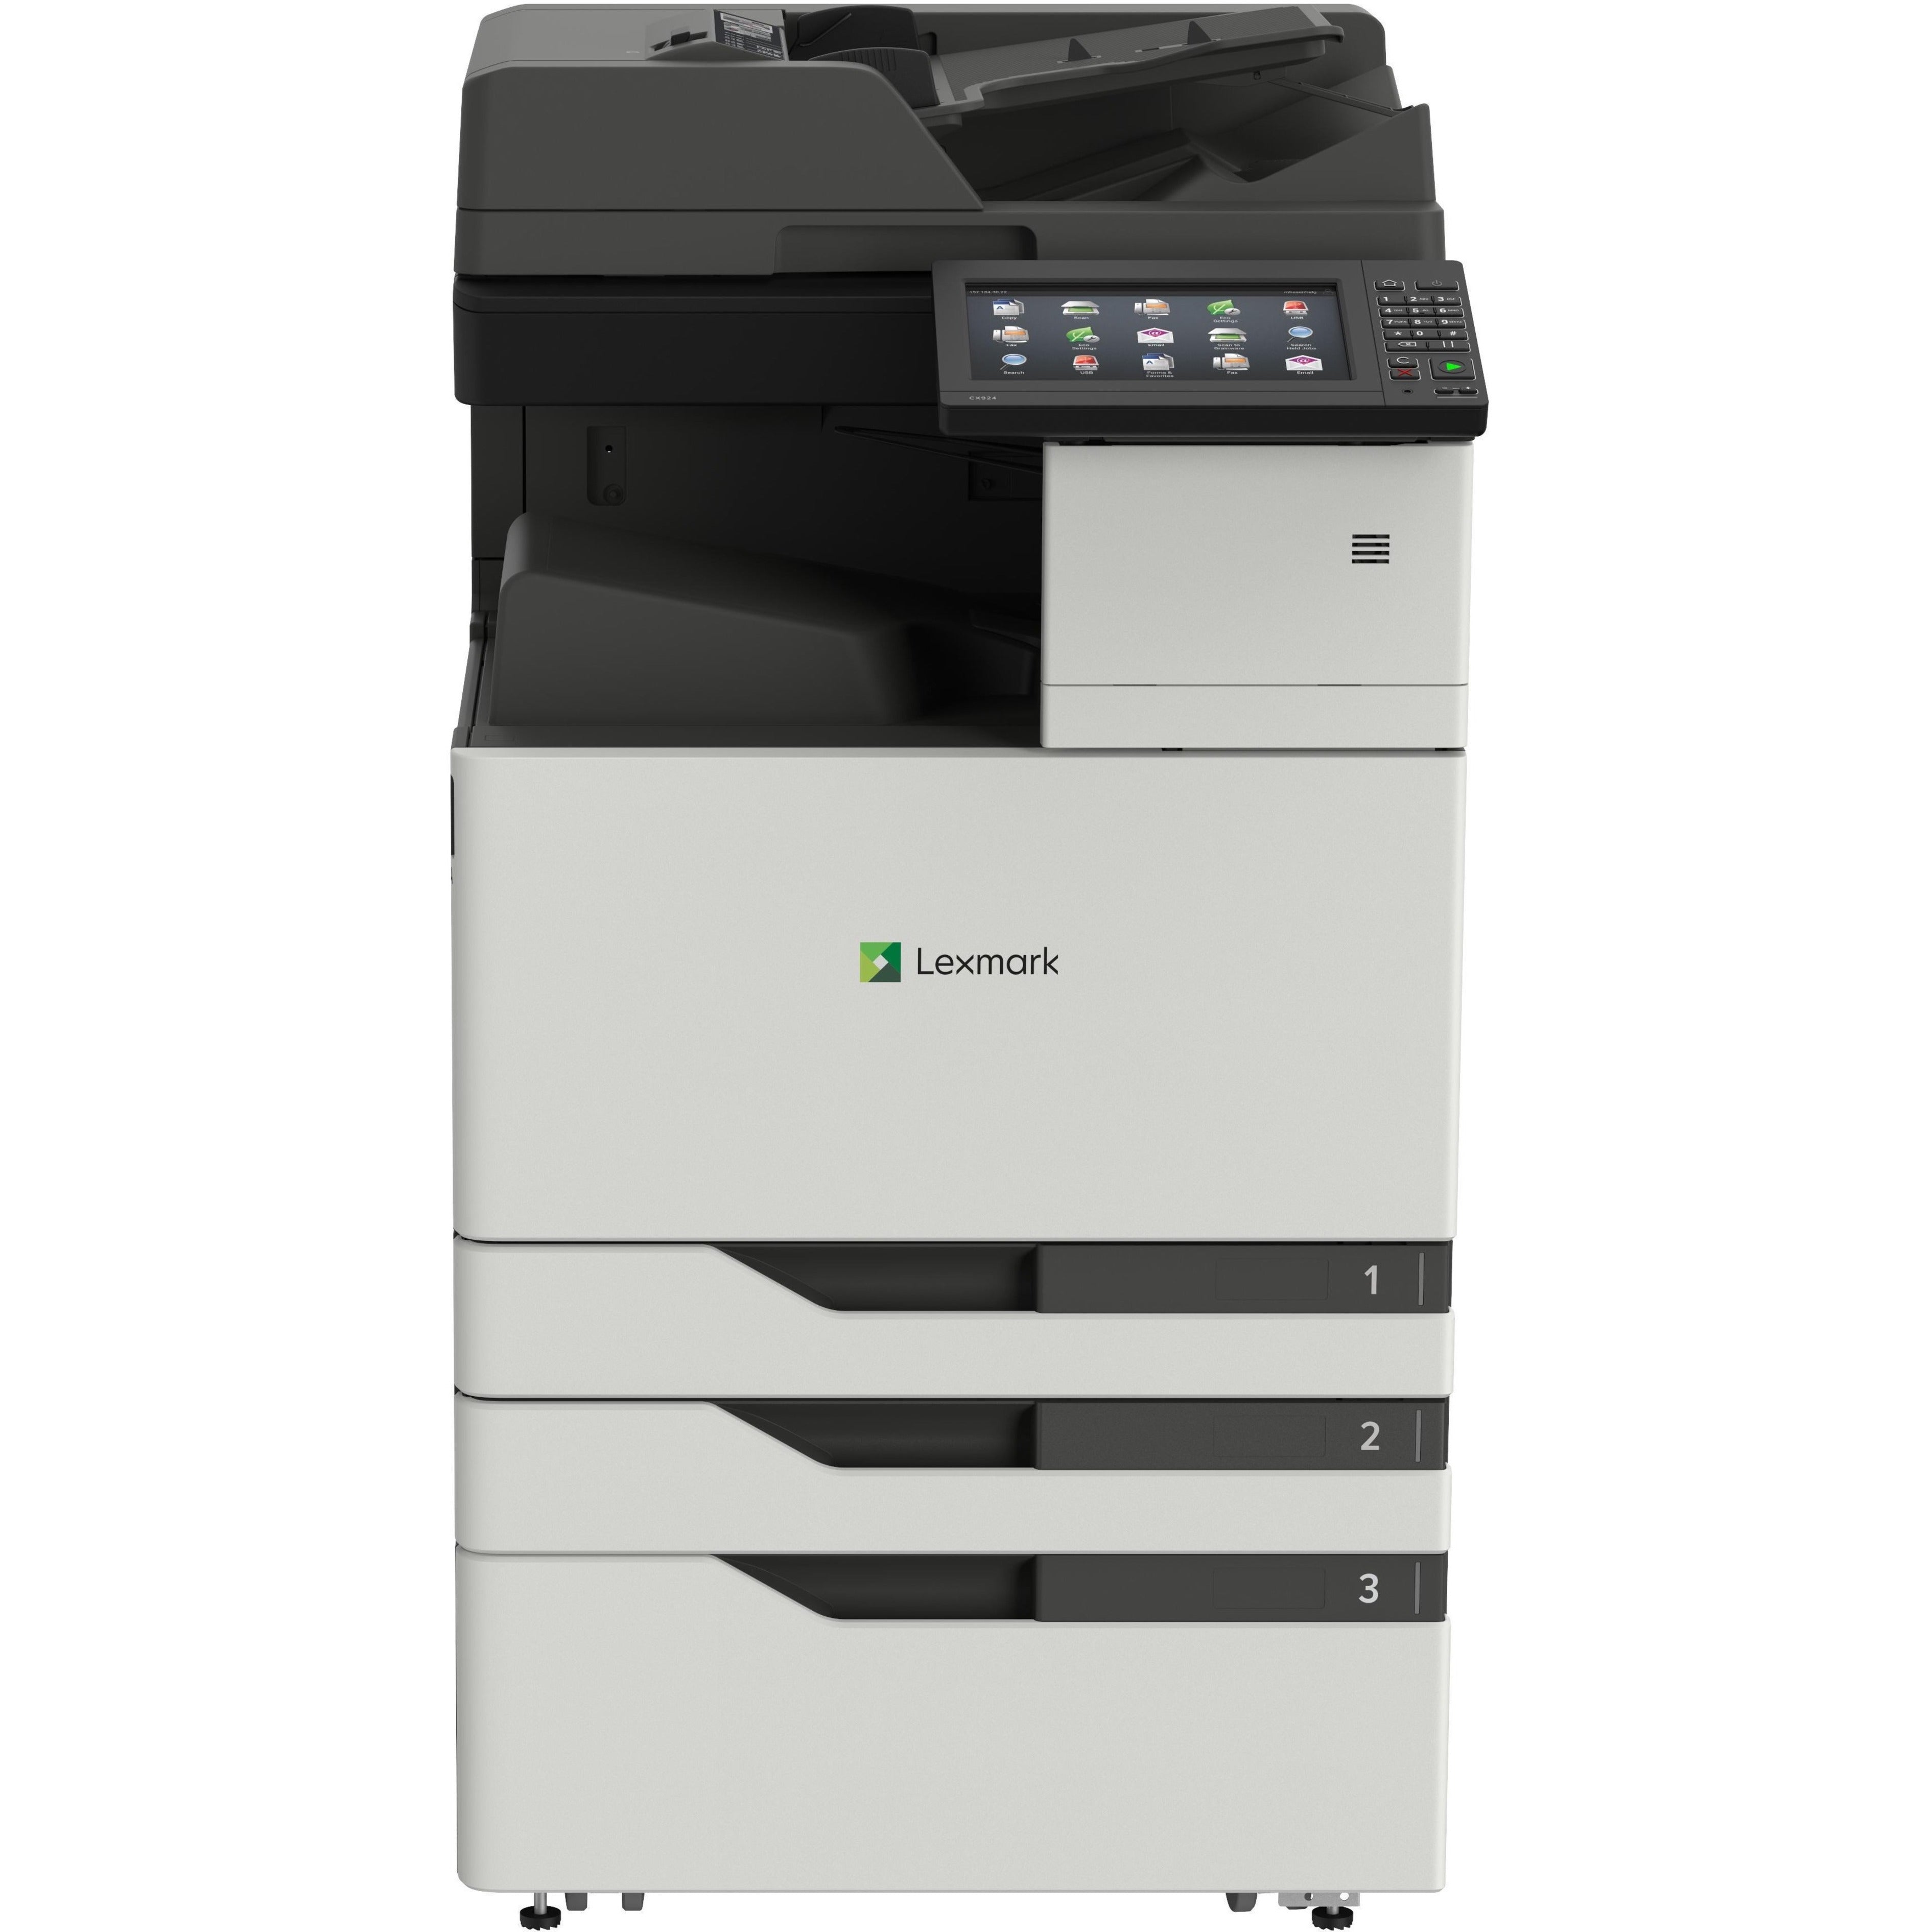 Lexmark 32CT055 CX924dxe Laser Multifunction Printer, Color, Flatbed, 600 dpi, 1 Year Warranty, 275,000 Duty Cycle, 8,000 to 50,000 Monthly Print Volume, Energy Star, TAA Compliant, USB, AC Supply, 120 V AC, 10 Touchscreen